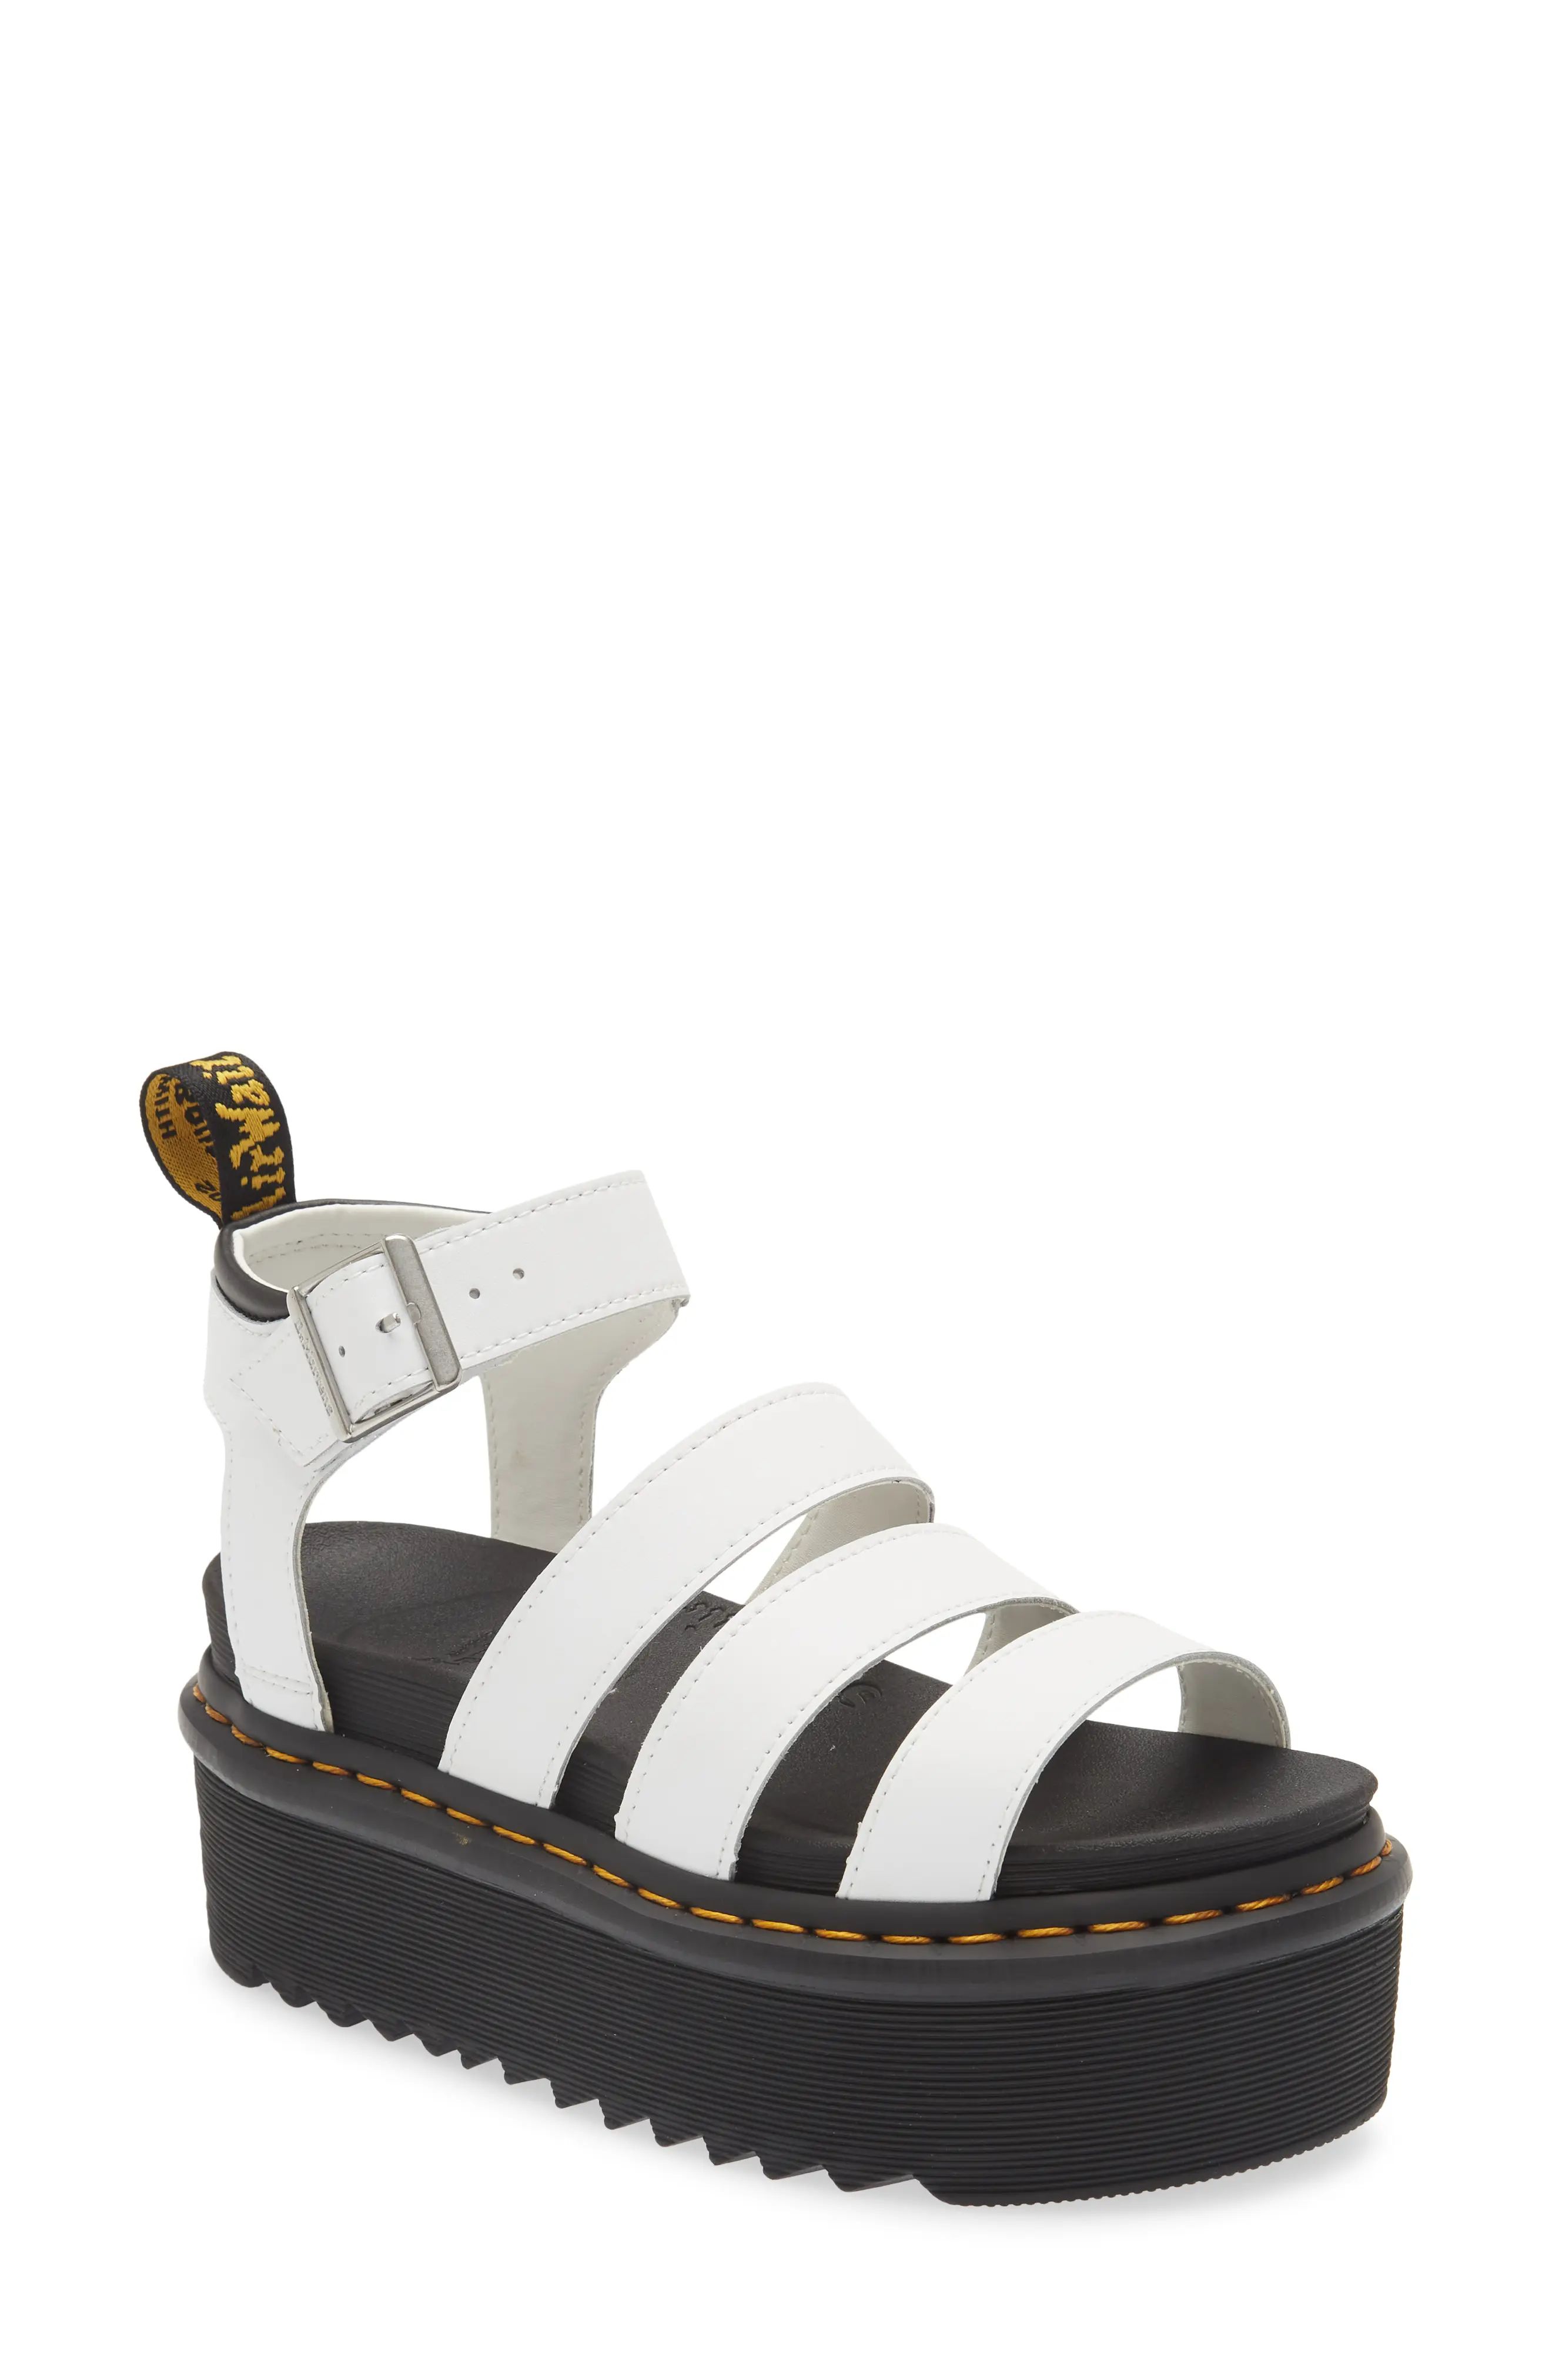 Dr. Martens Blaire Hydro Platform Sandal in White Hydro at Nordstrom, Size 6Us | Nordstrom